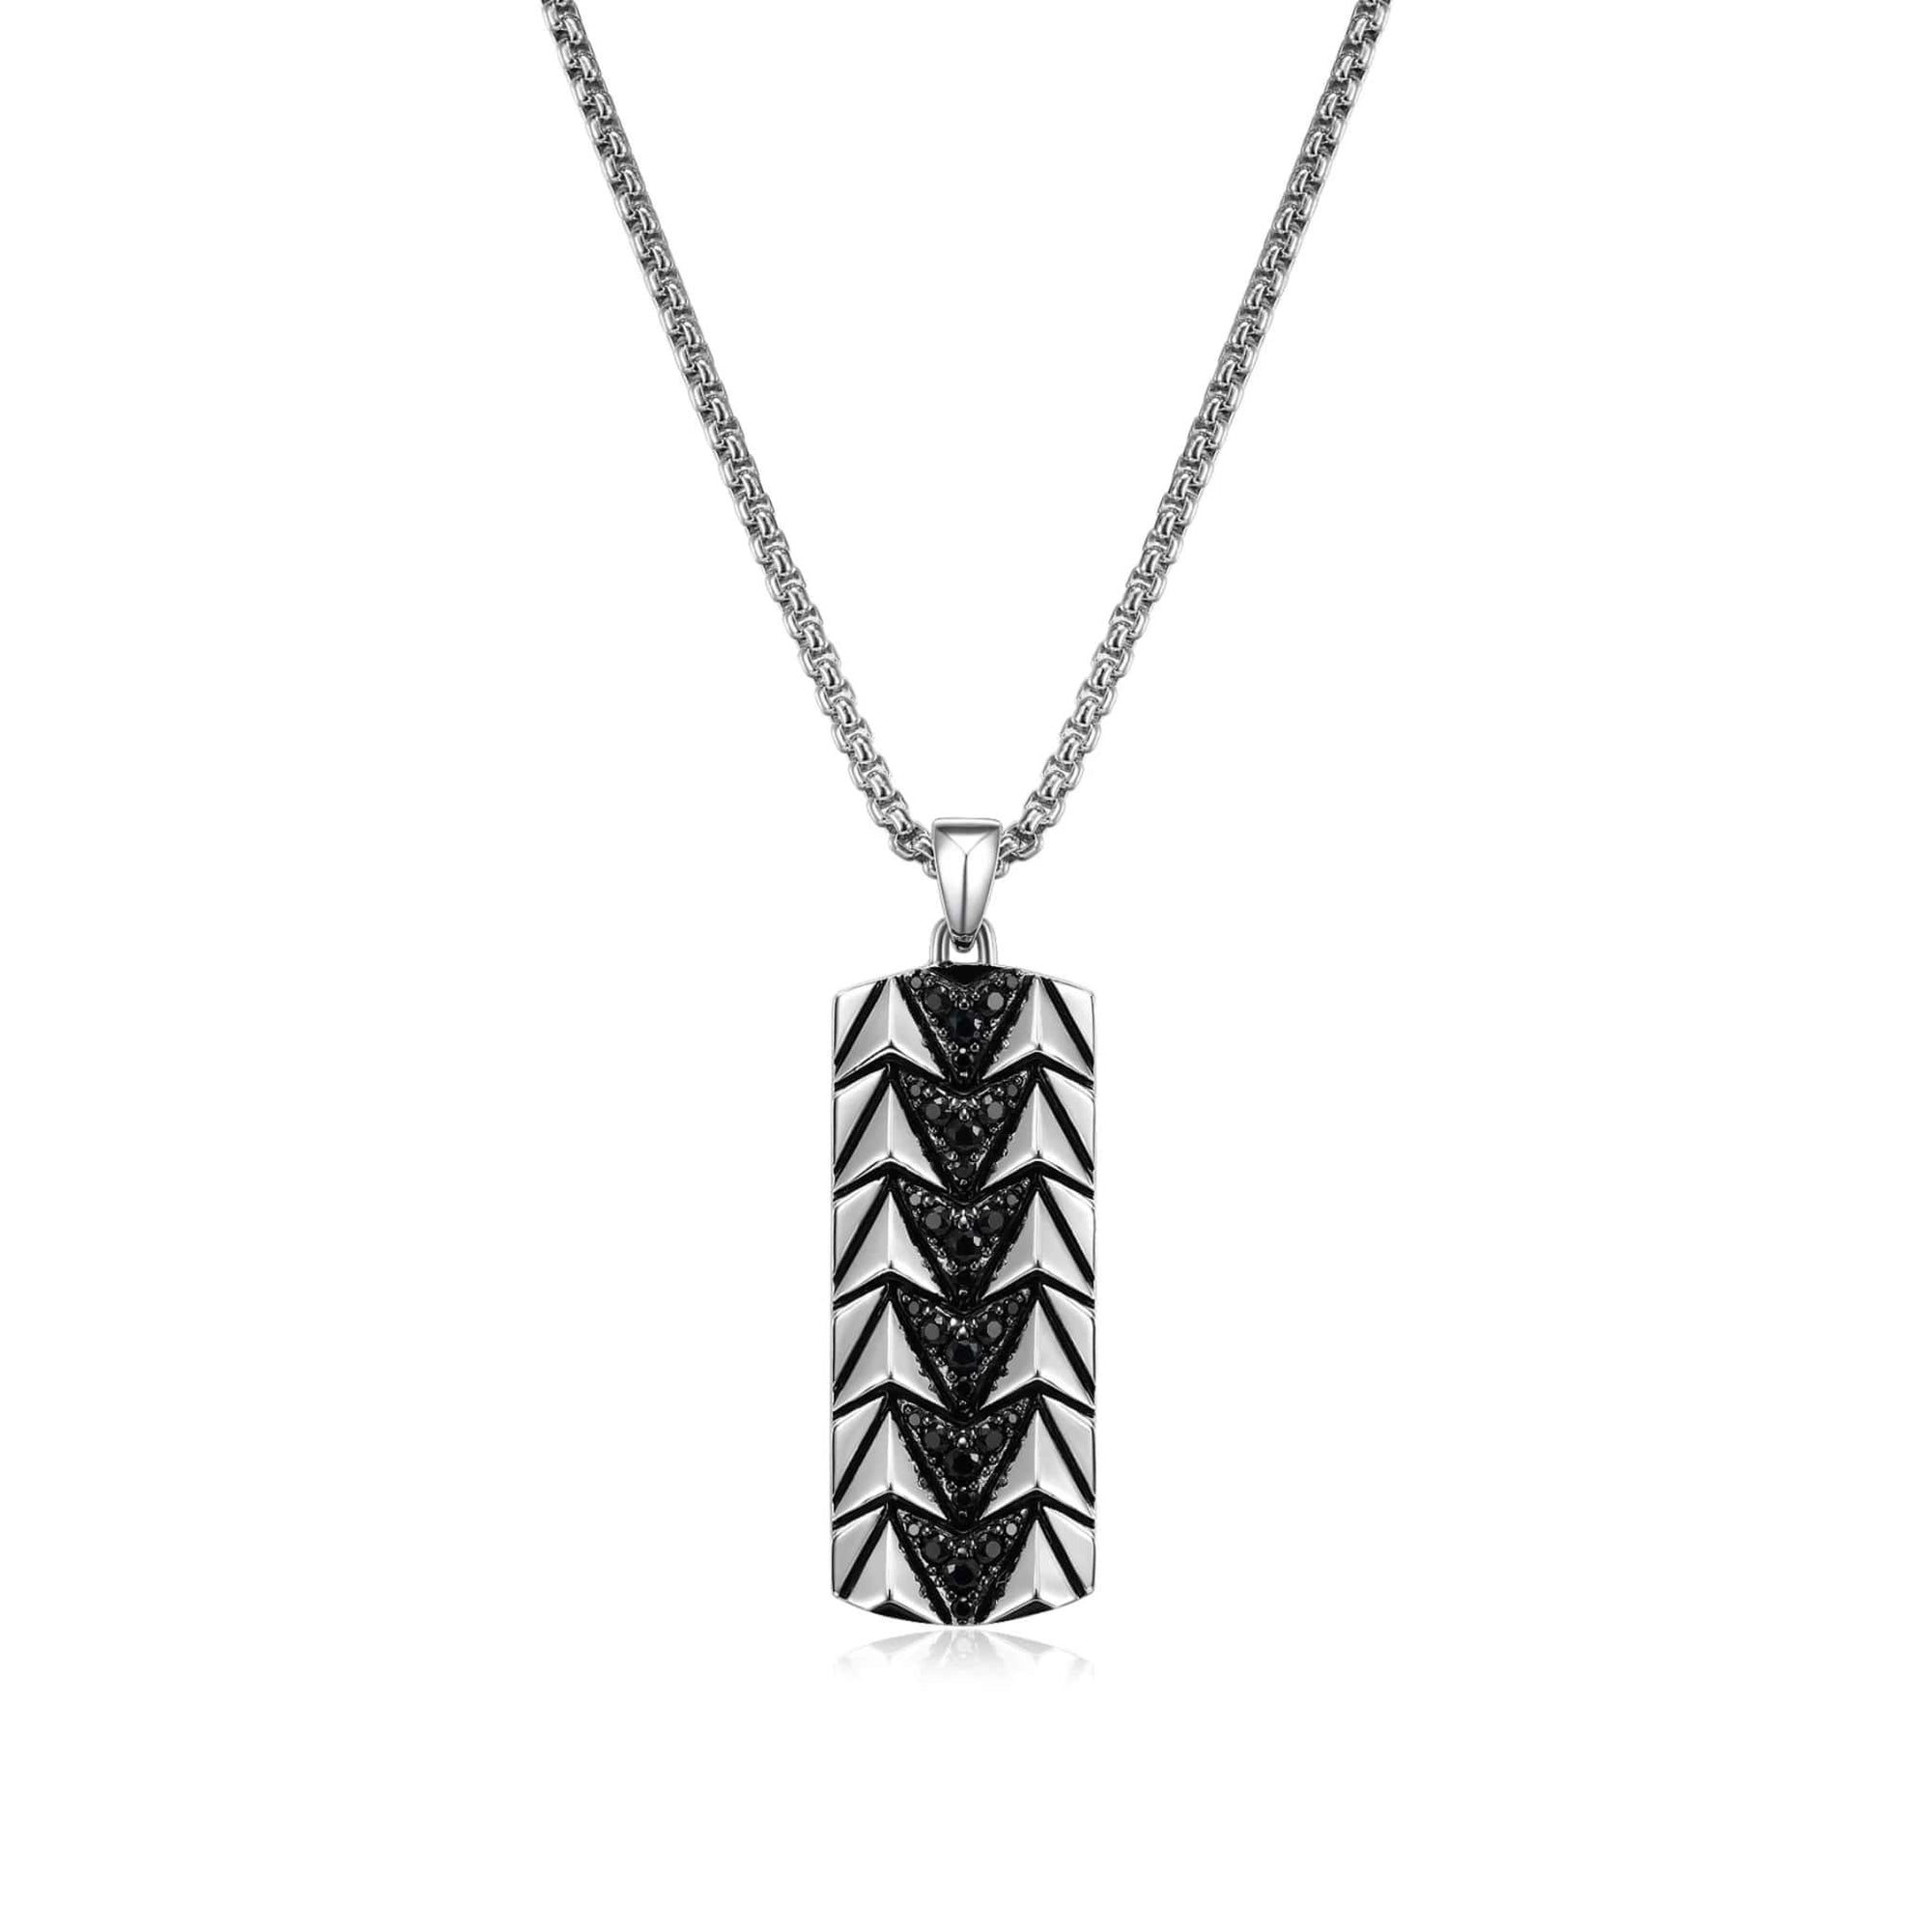 ETHOS "Chevron" Black Sapphire Silver Dog Tag Necklace at Arman's Jewellers Kitchener